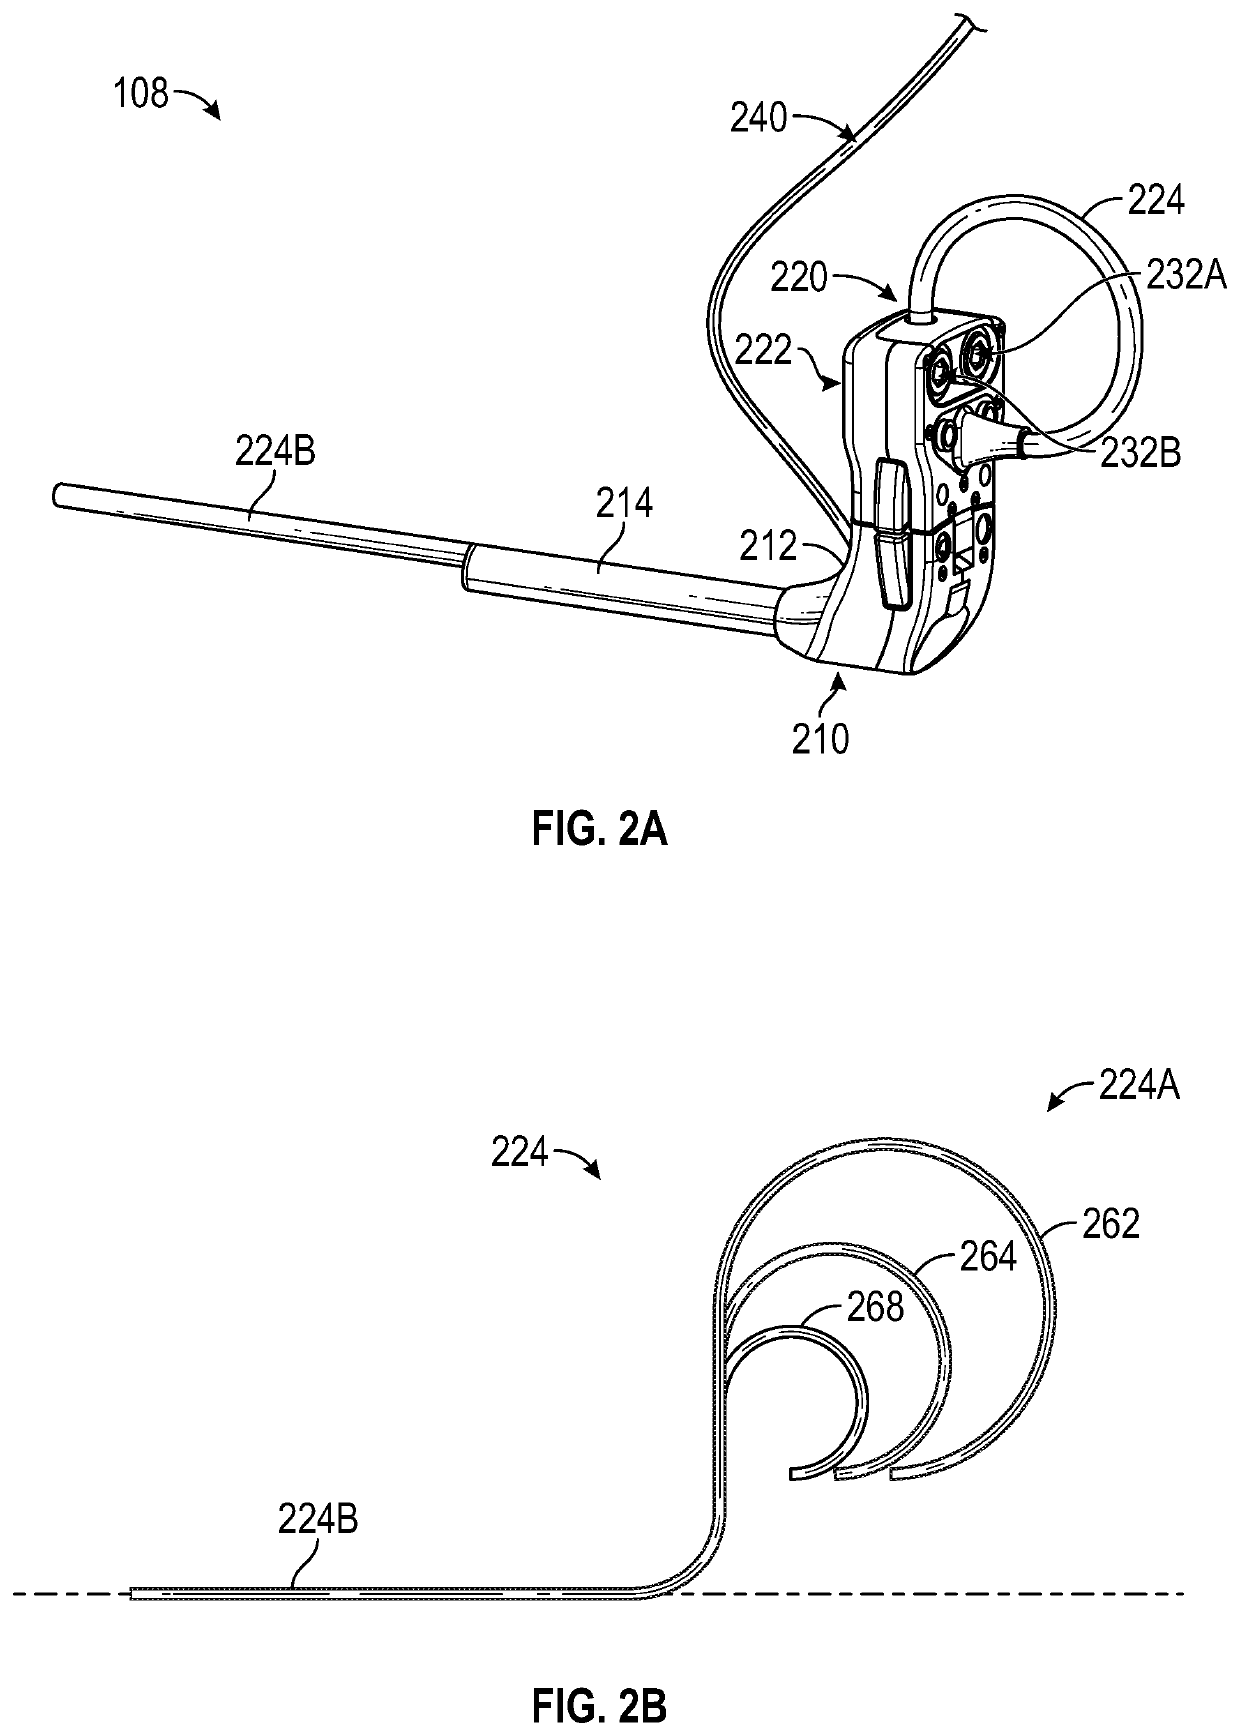 Camera positioning system, method, and apparatus for capturing images during a medical procedure